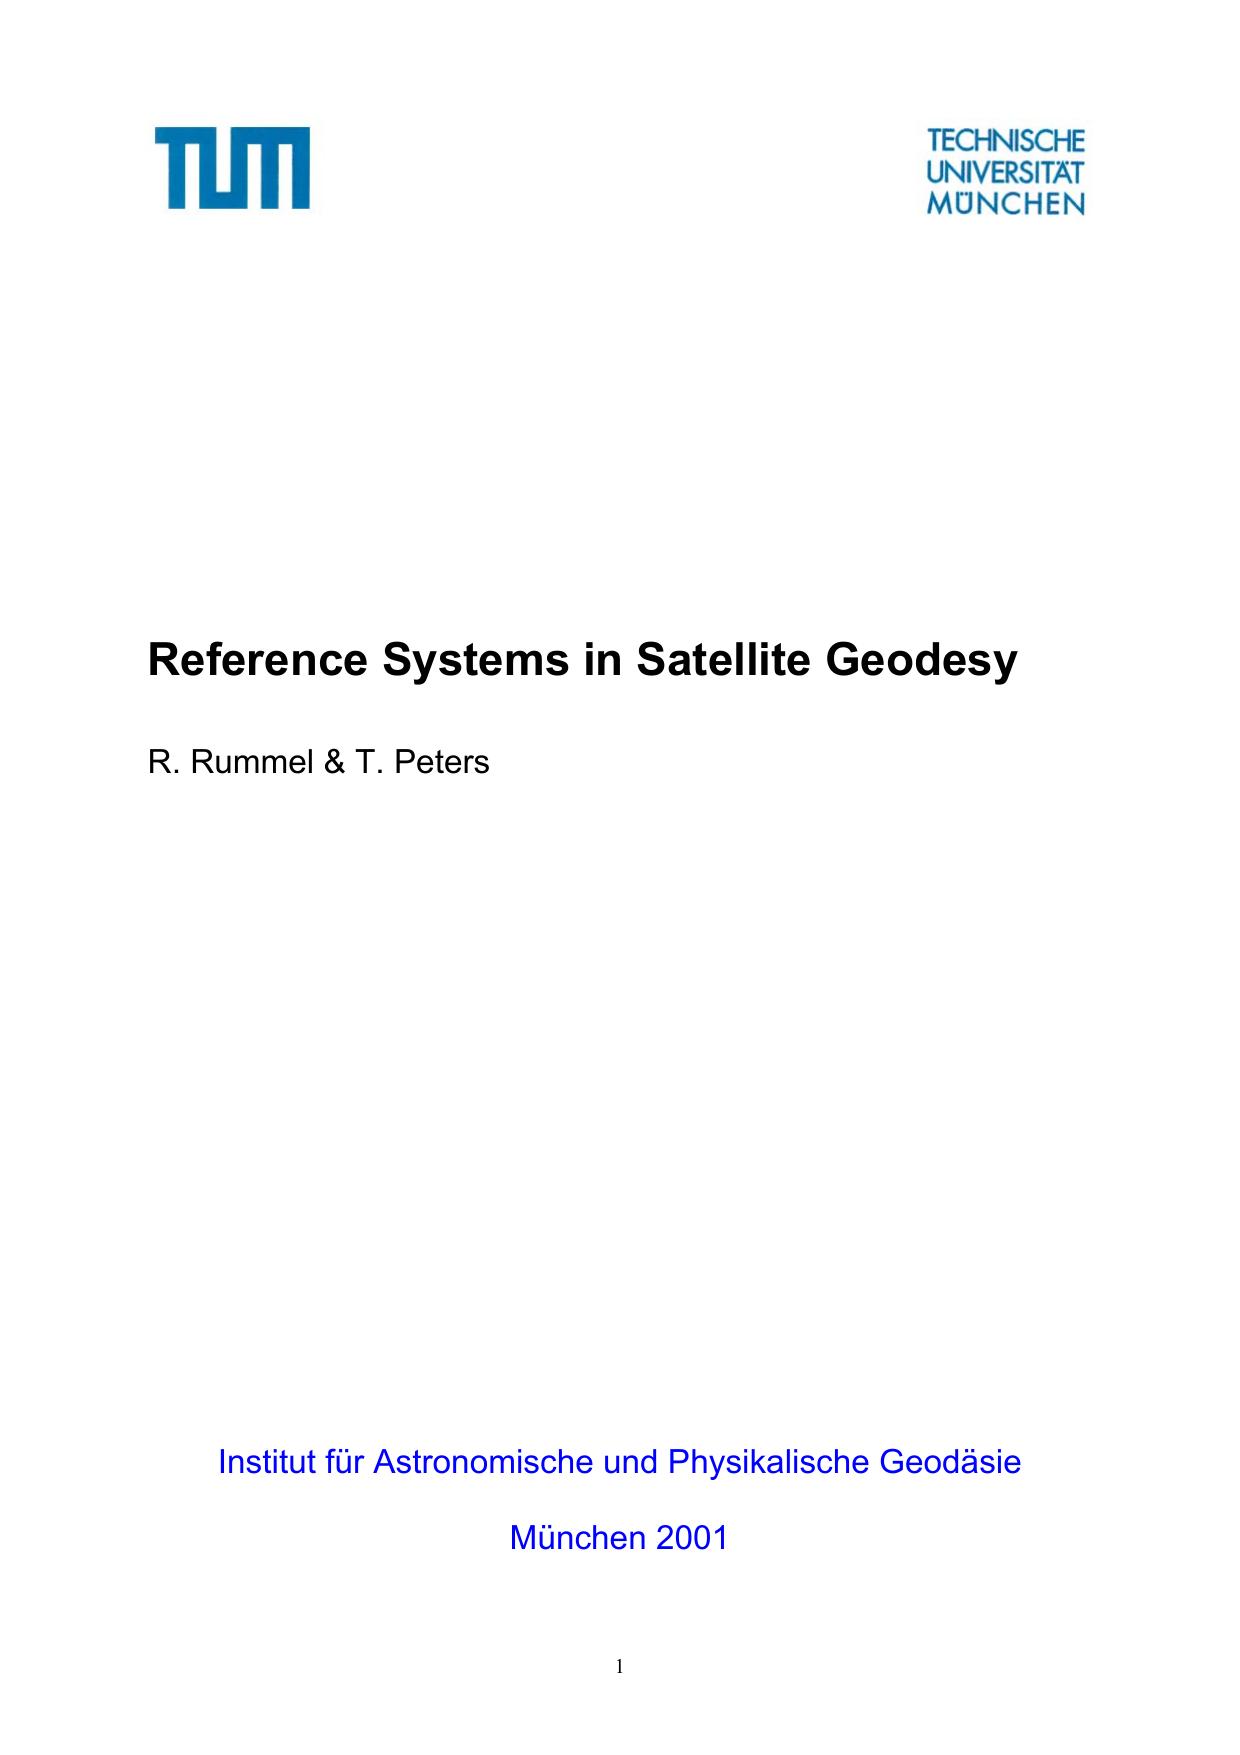 Reference Systems in Satellite Geodesy